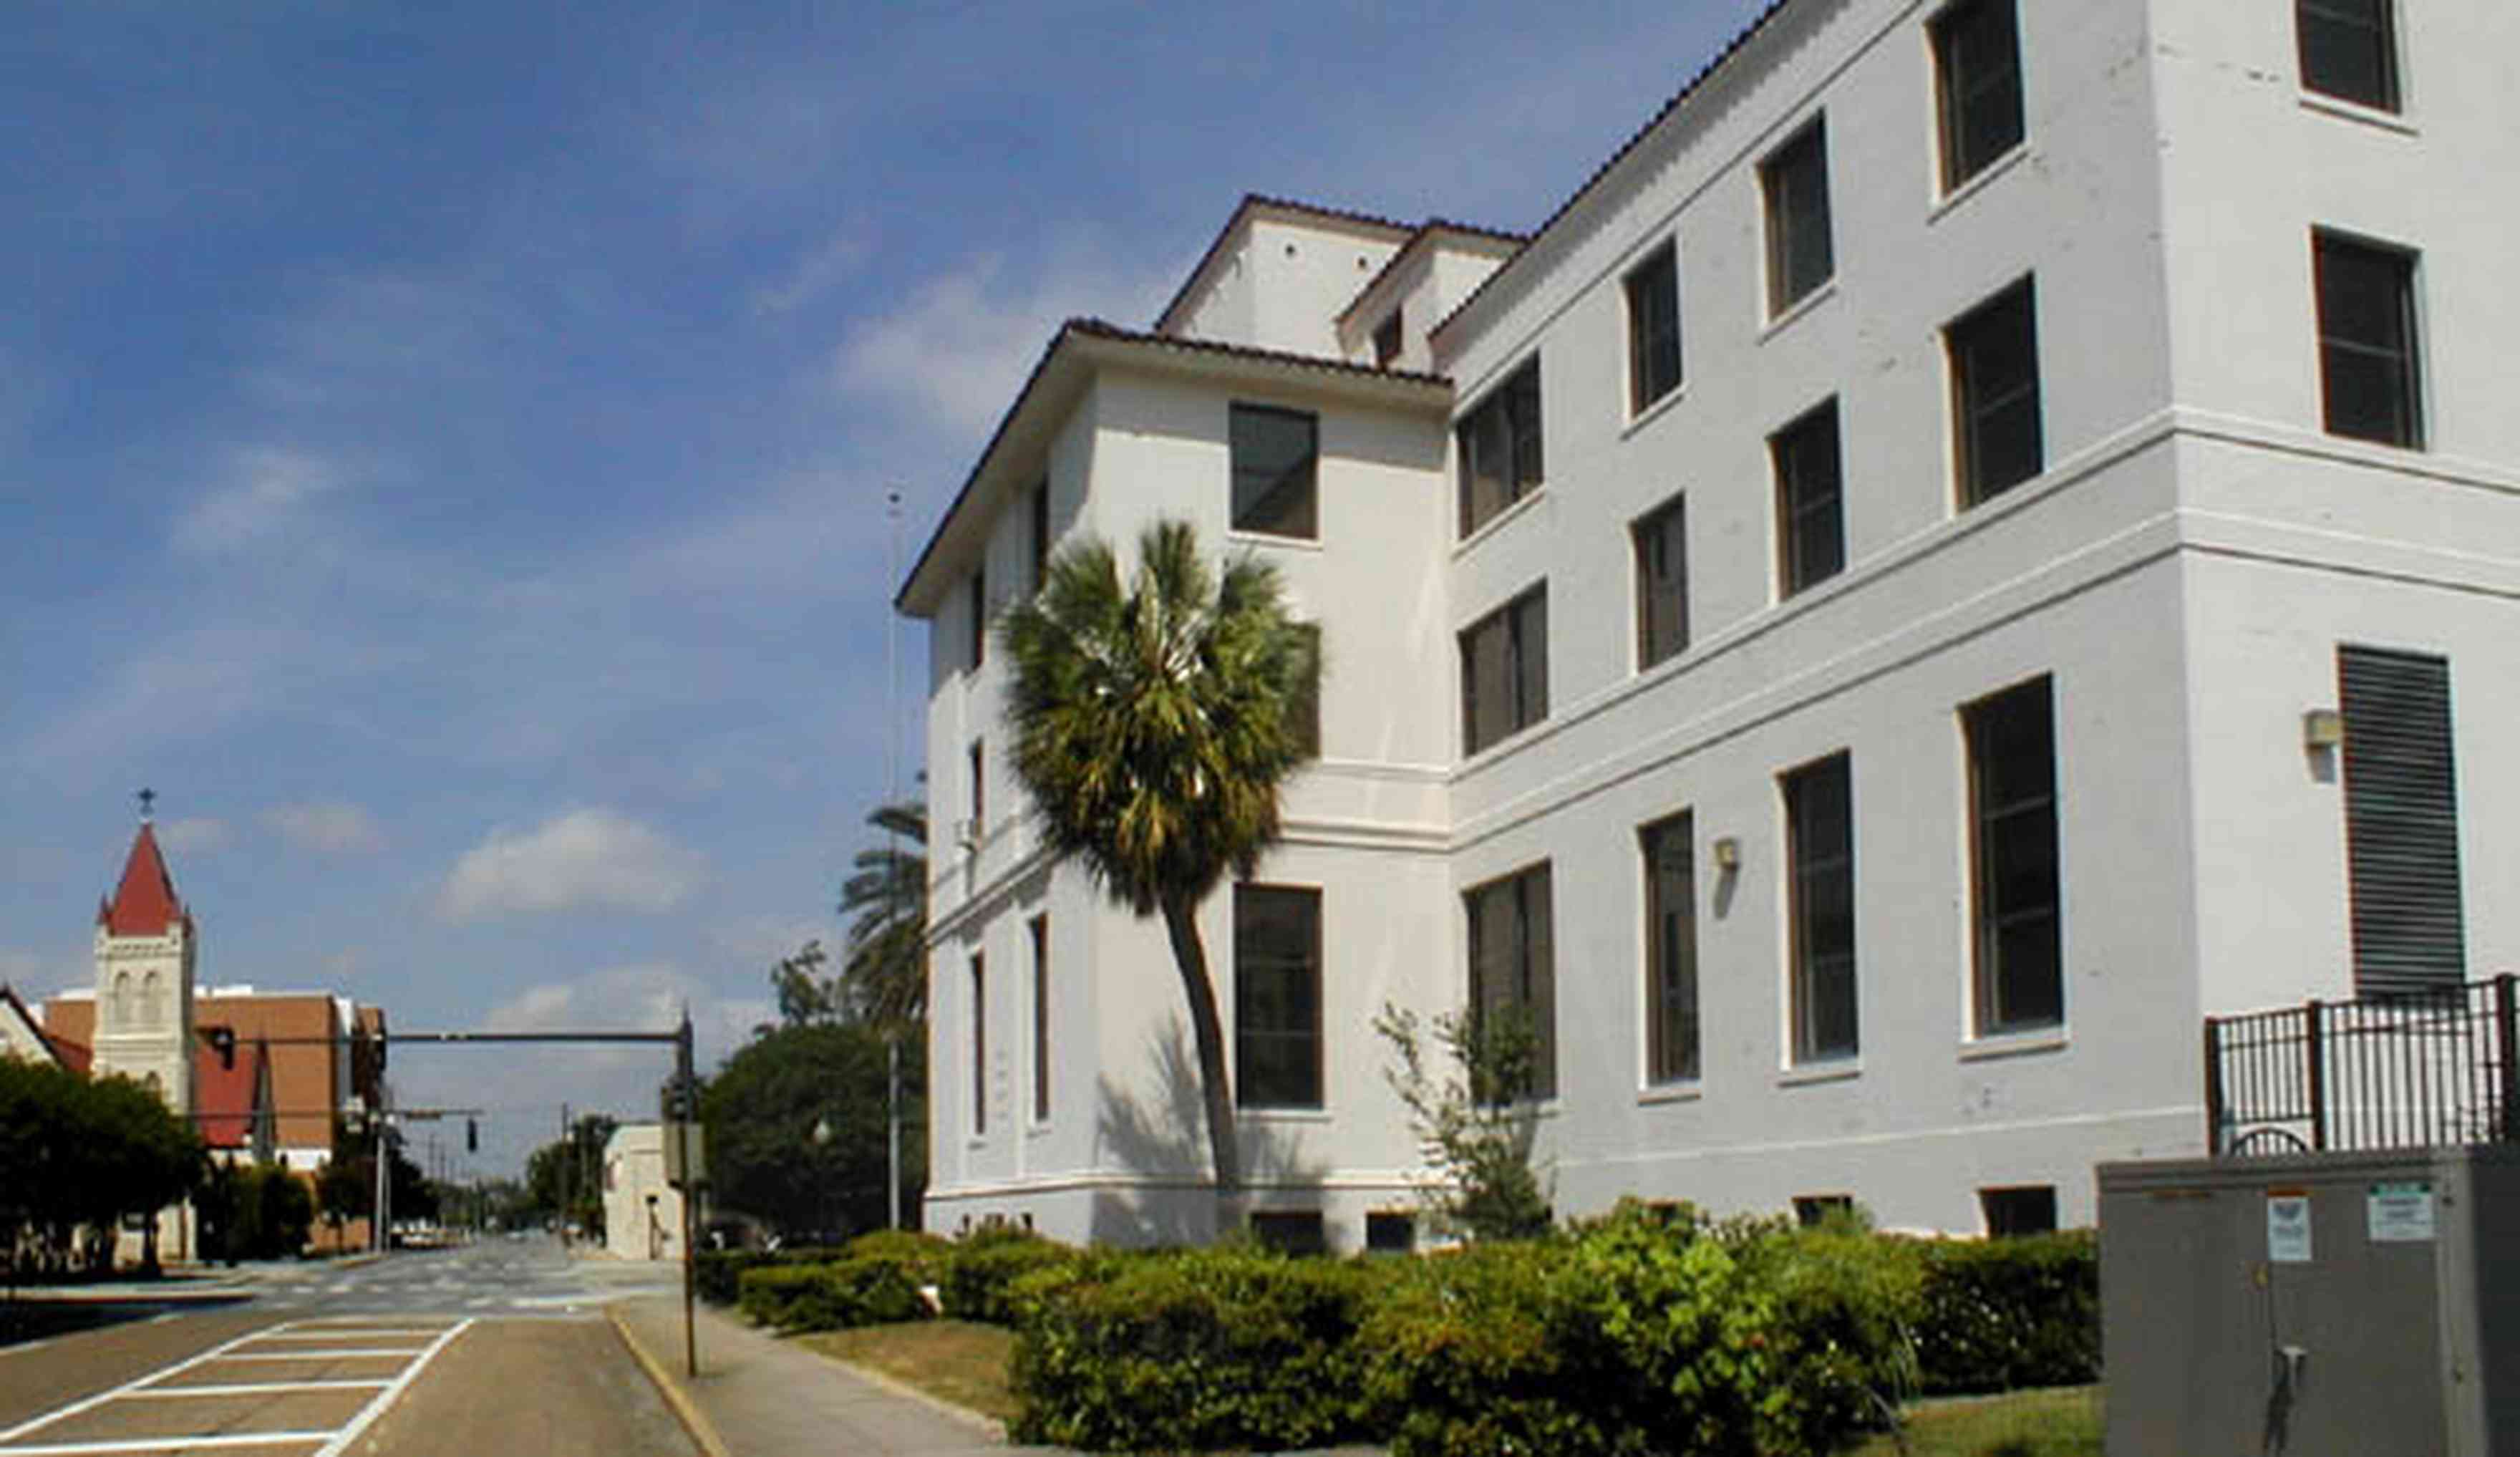 Pensacola:-Palafox-Historic-District:-Old-Federal-Courthouse_02.jpg:  courthouse, palafox street, st. michael's church, palm tree, stucco